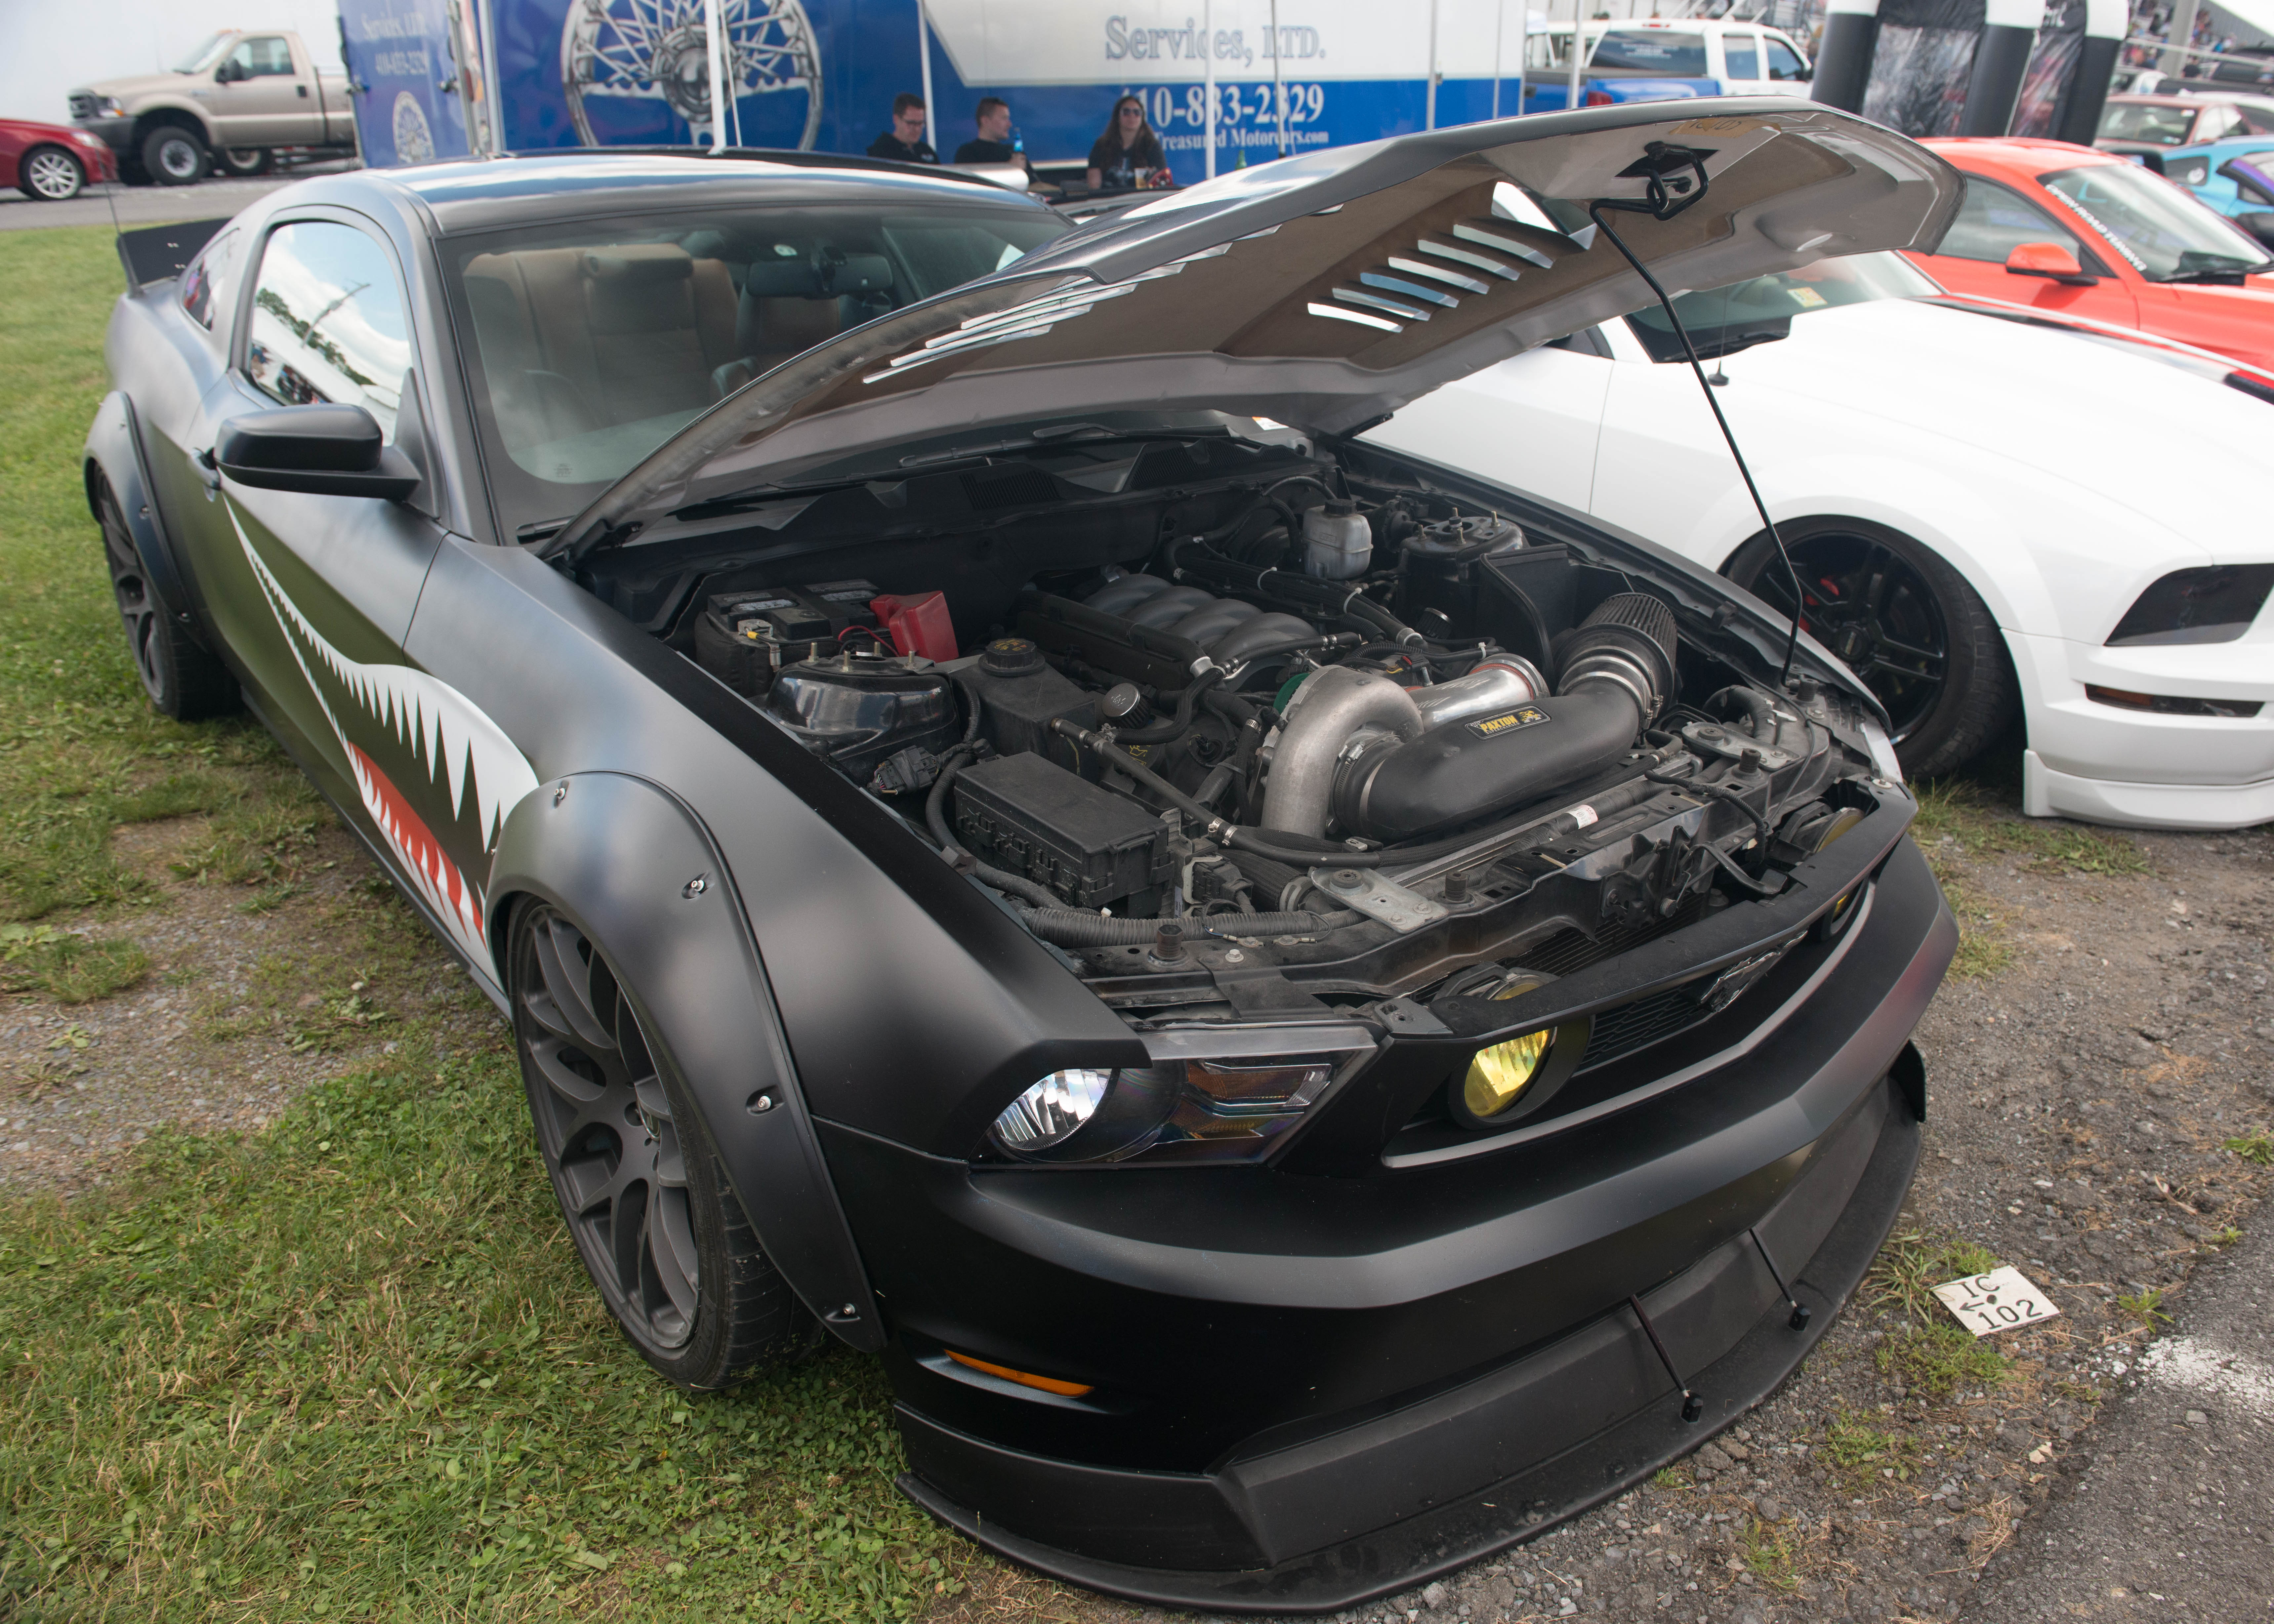 2010-2014 Mustang at Carlisle with a Large Single Turbo